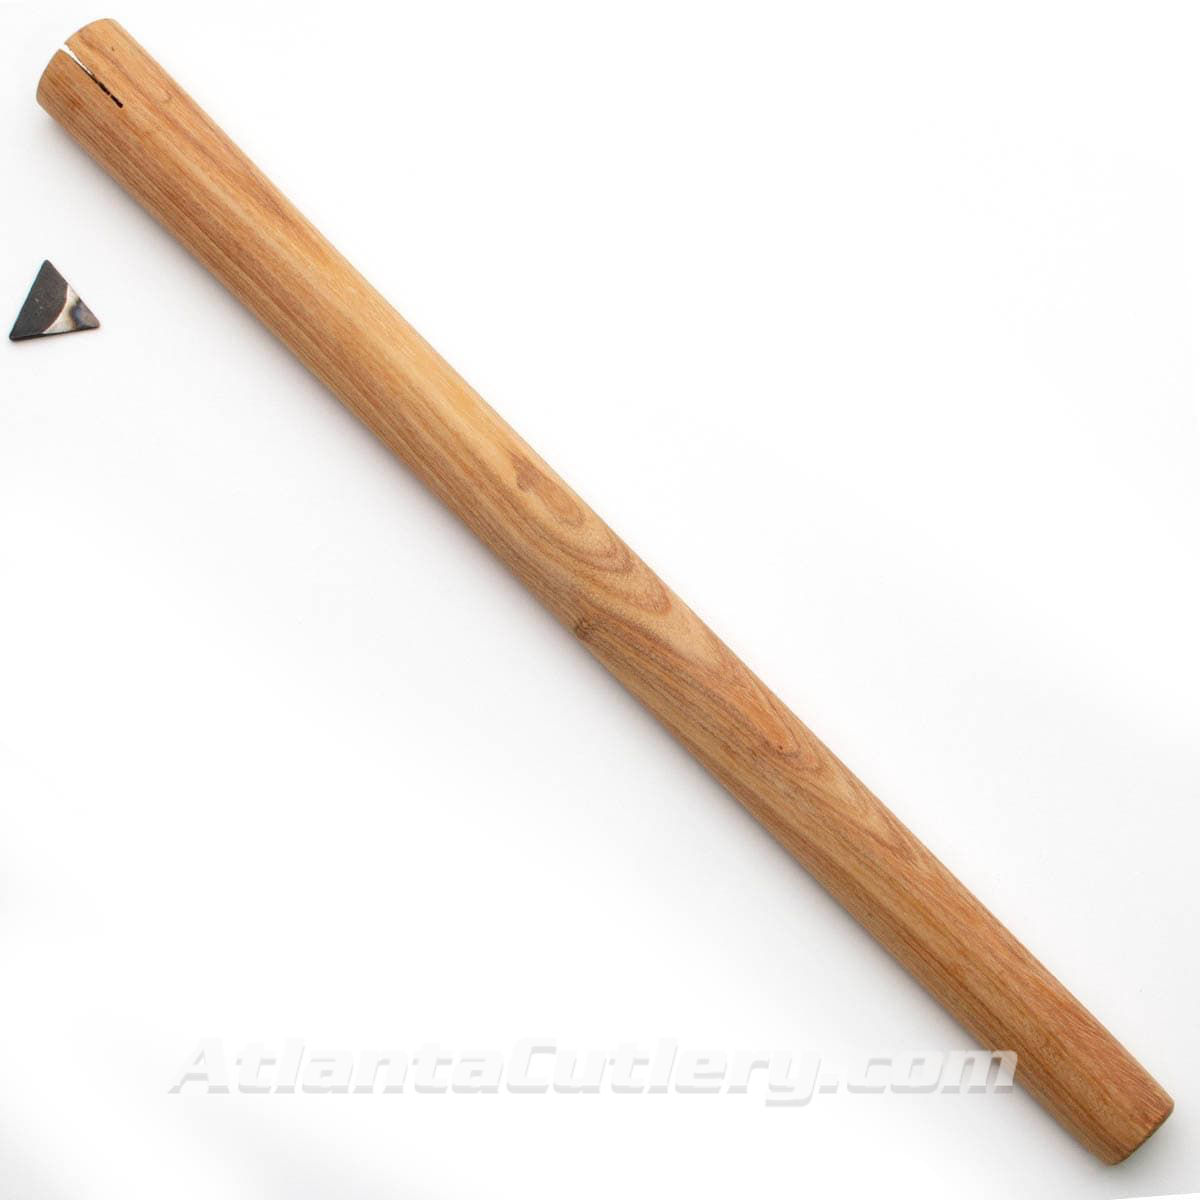 American Hickory replacement throwing tomahawk handle is 19-1/4" long. Unfinished, and includes metal wedge to tighten top.